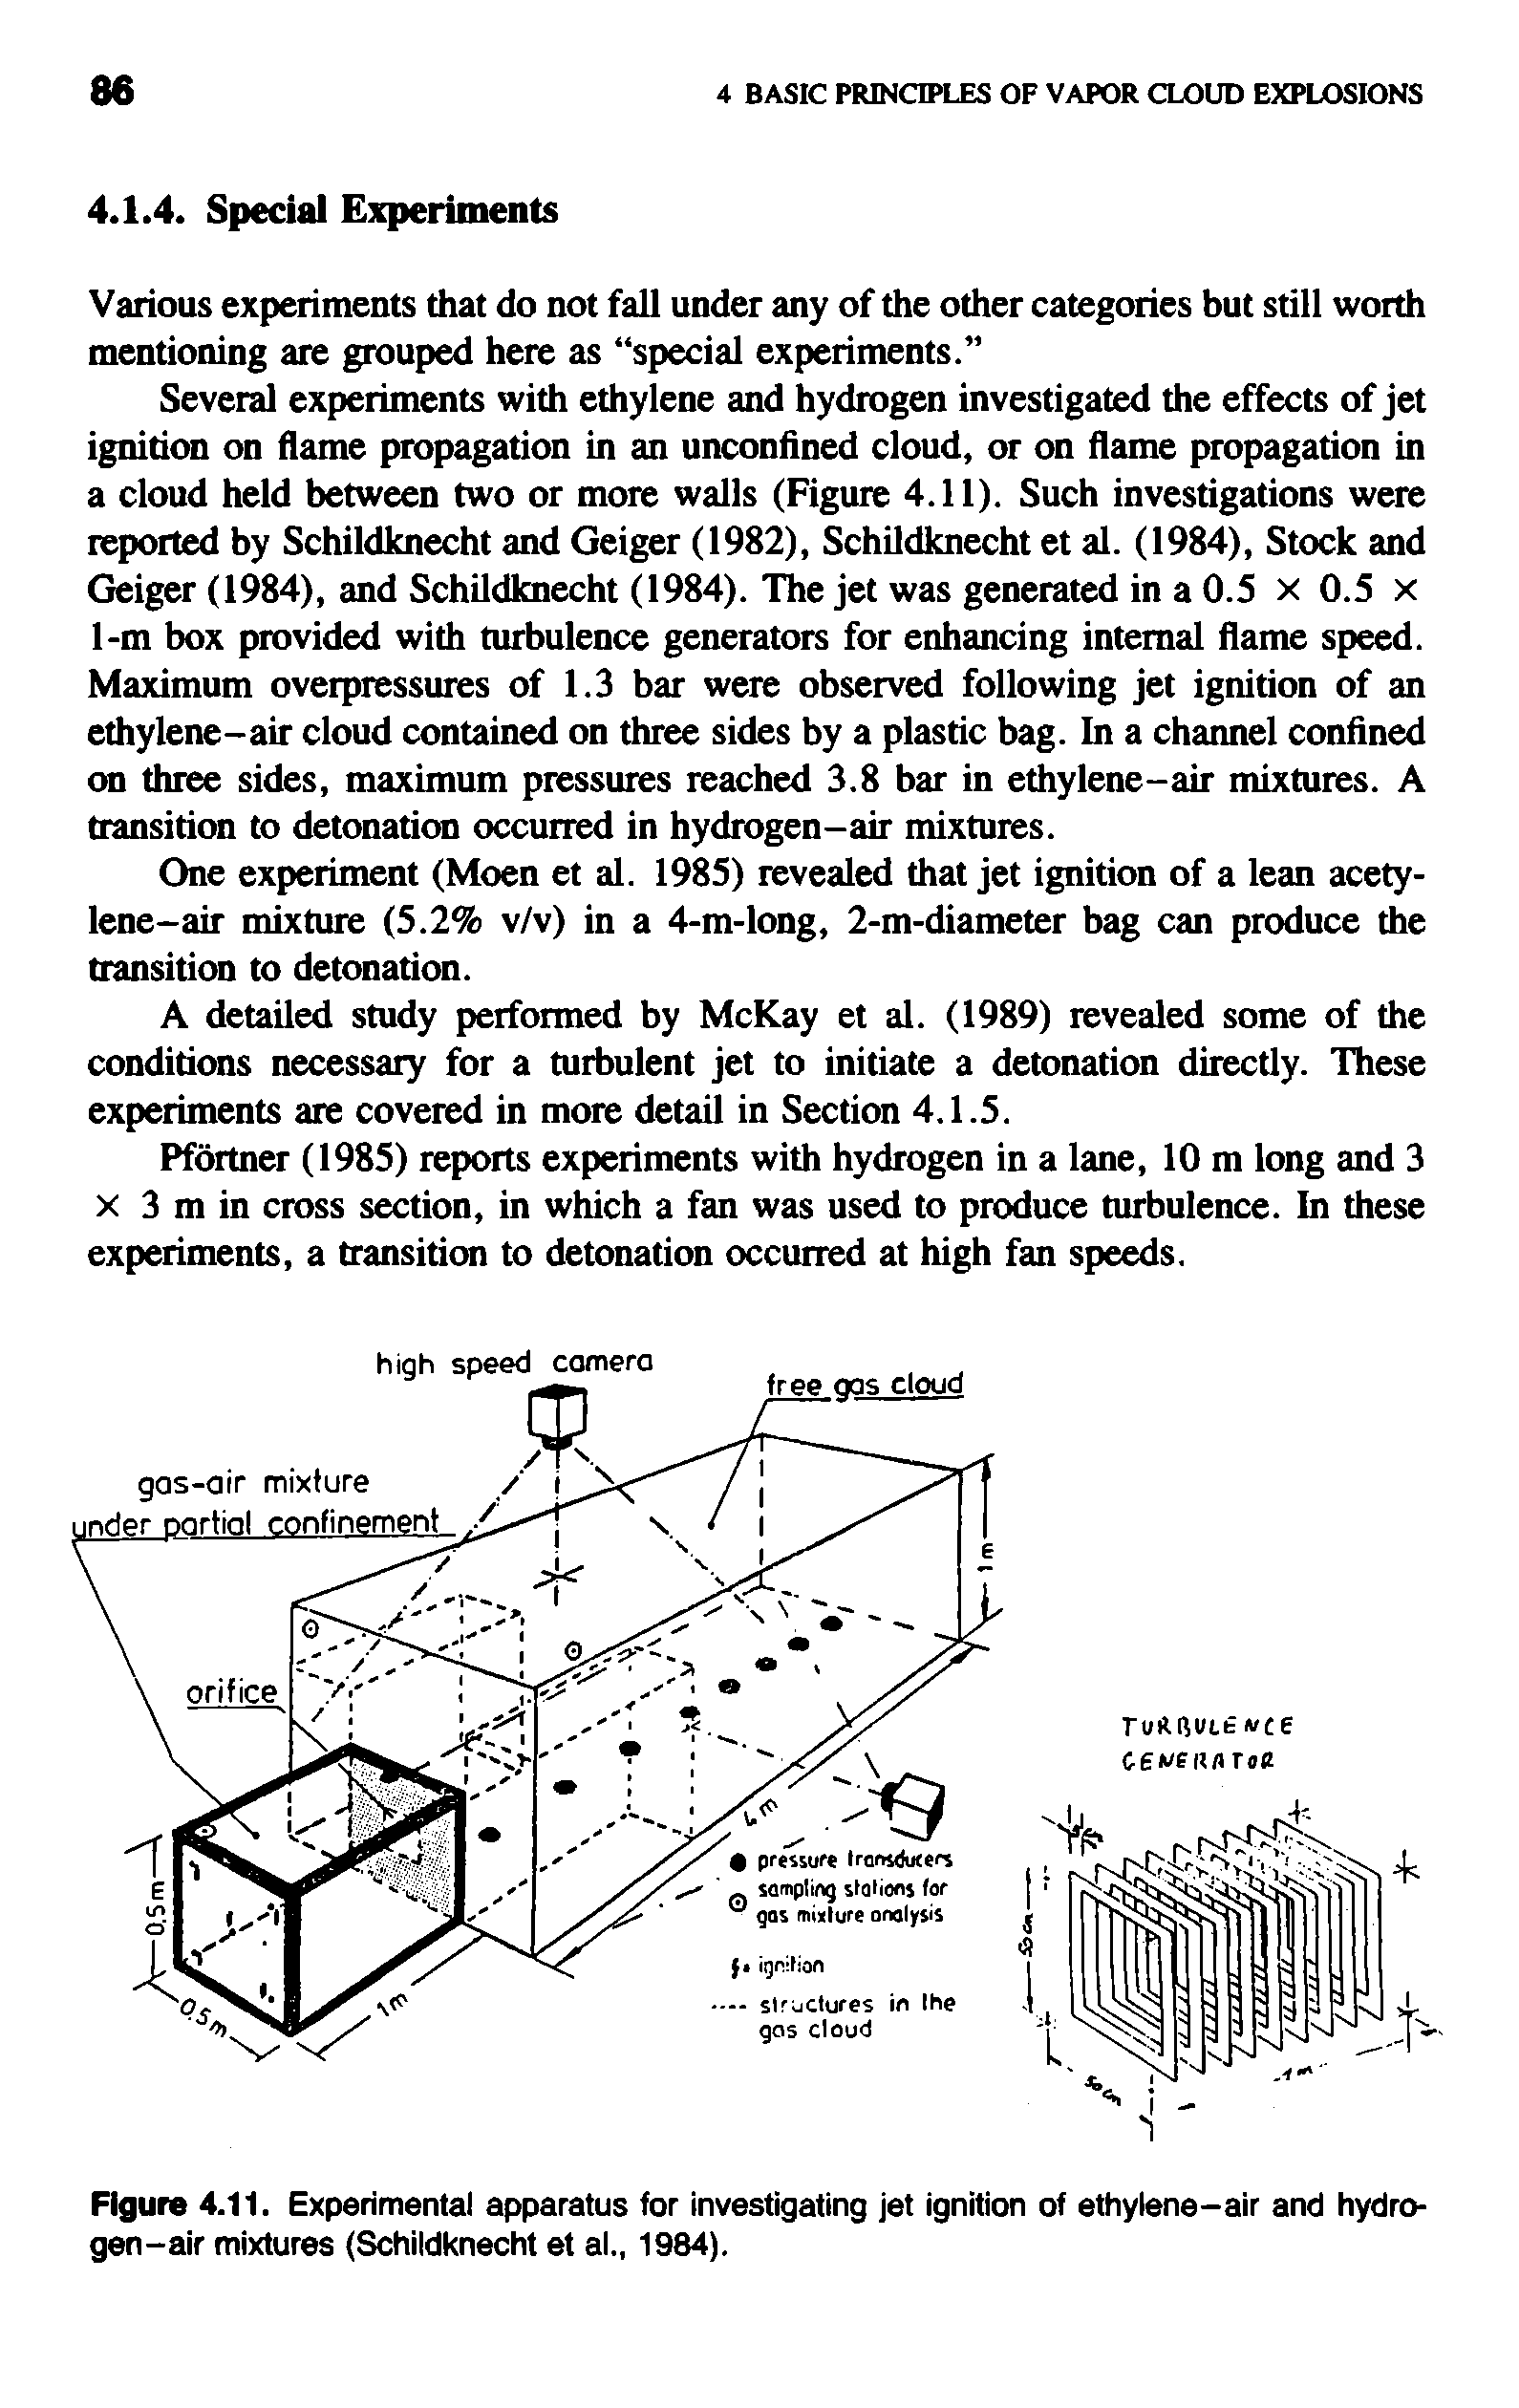 Figure 4.11. Experimental apparatus for investigating jet ignition of ethylene-air and hydro-gen-air mixtures (Schildknecht et al., 1984).